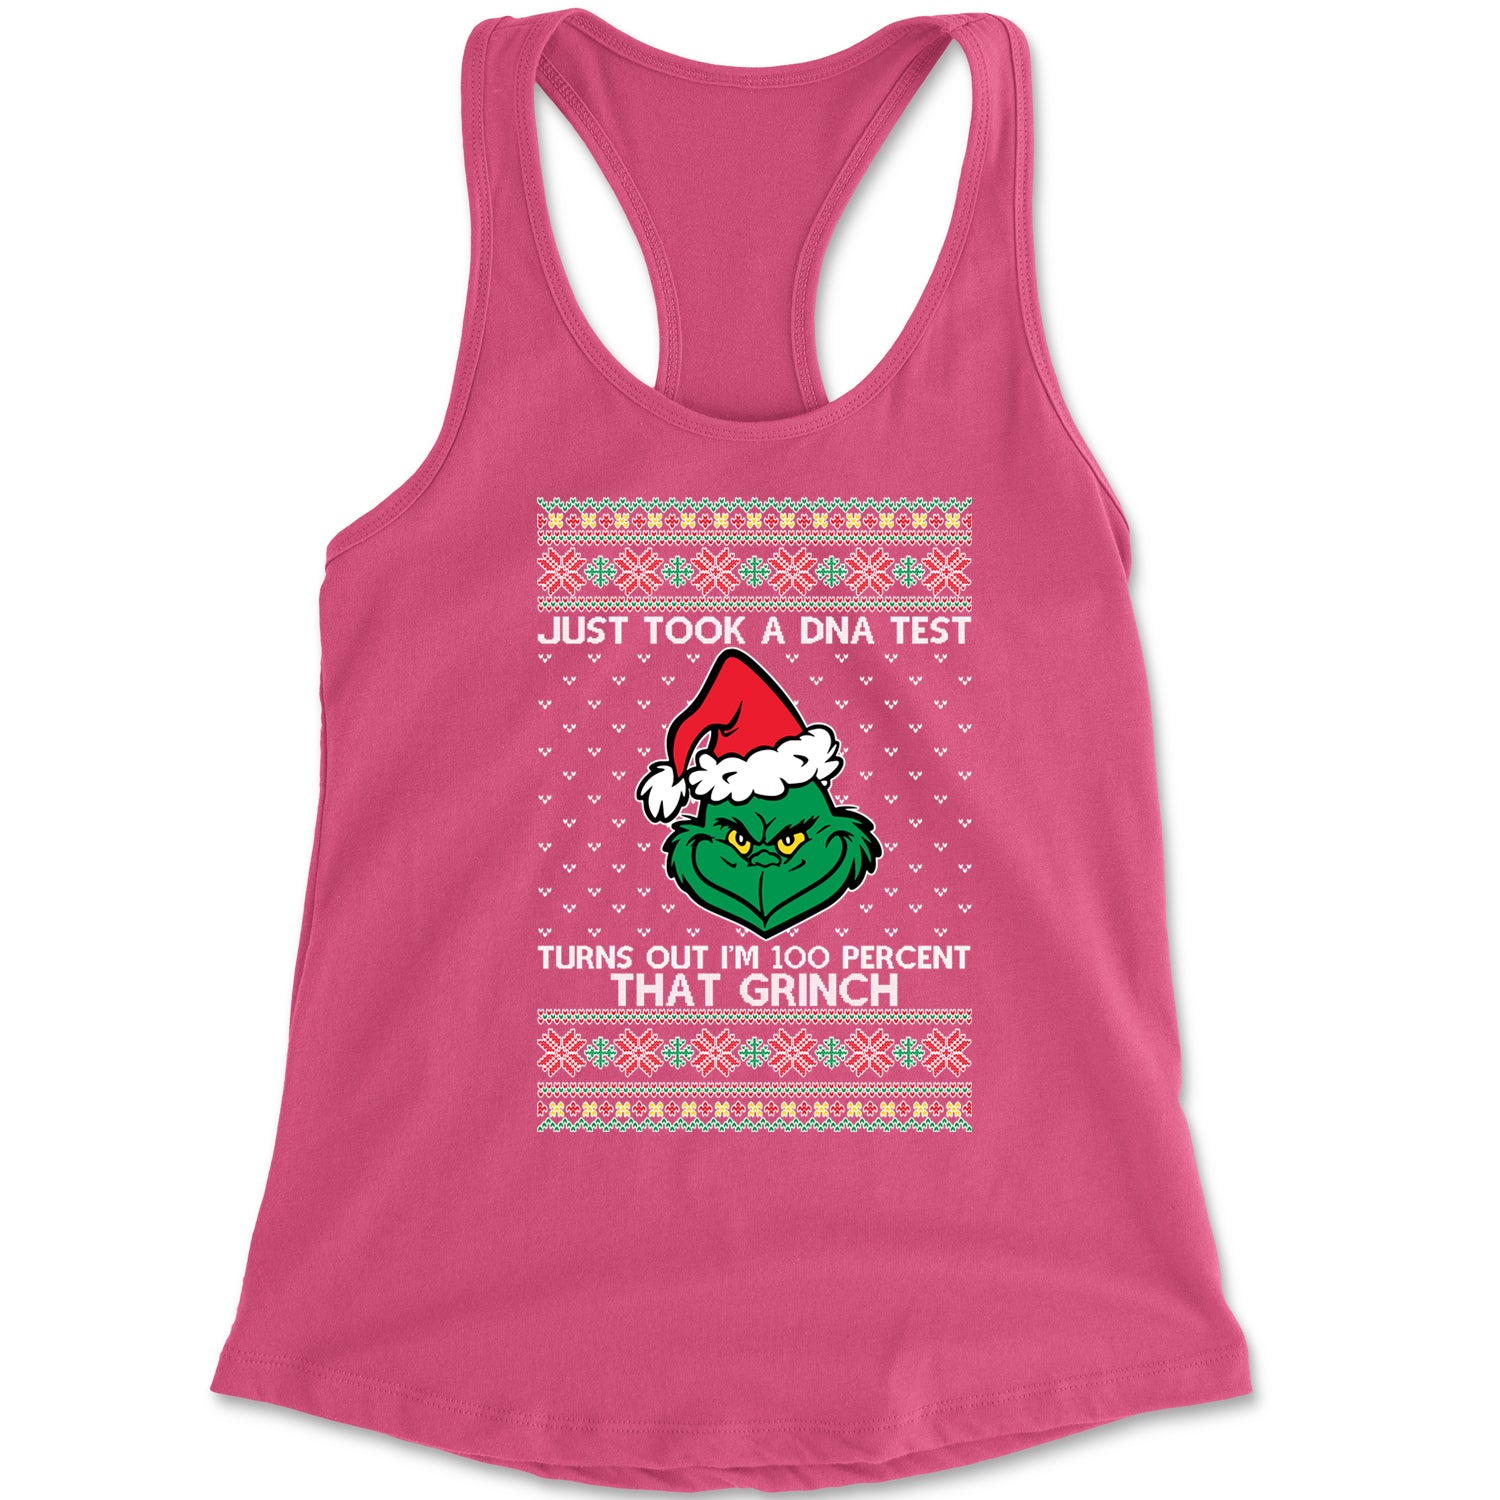 One Hundred Percent That Grinch Racerback Tank Top for Women christmas, grinch, sweater, sweatshirt, ugly, xmas by Expression Tees